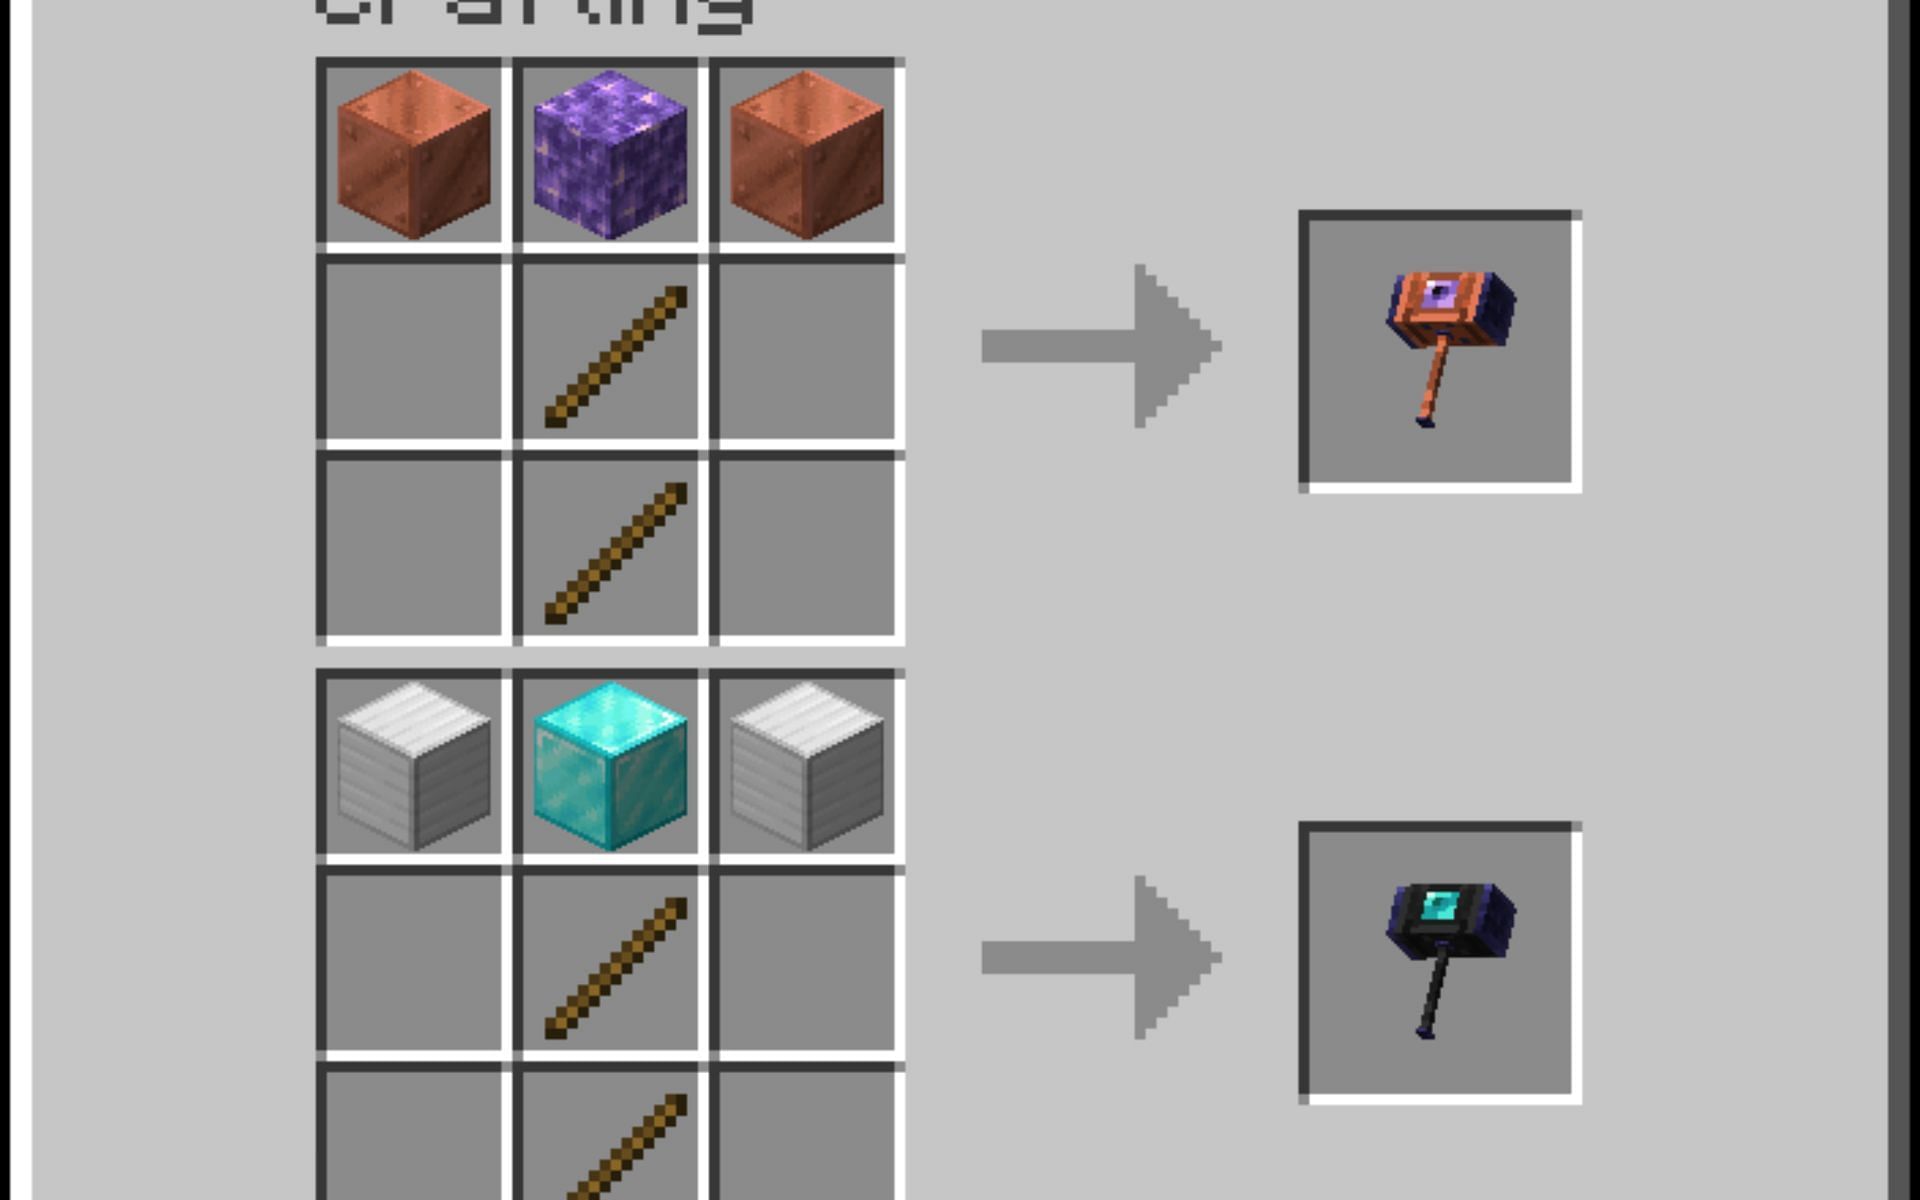 Making the block swapping tools (Image via Curseforge/ tinytransfem)